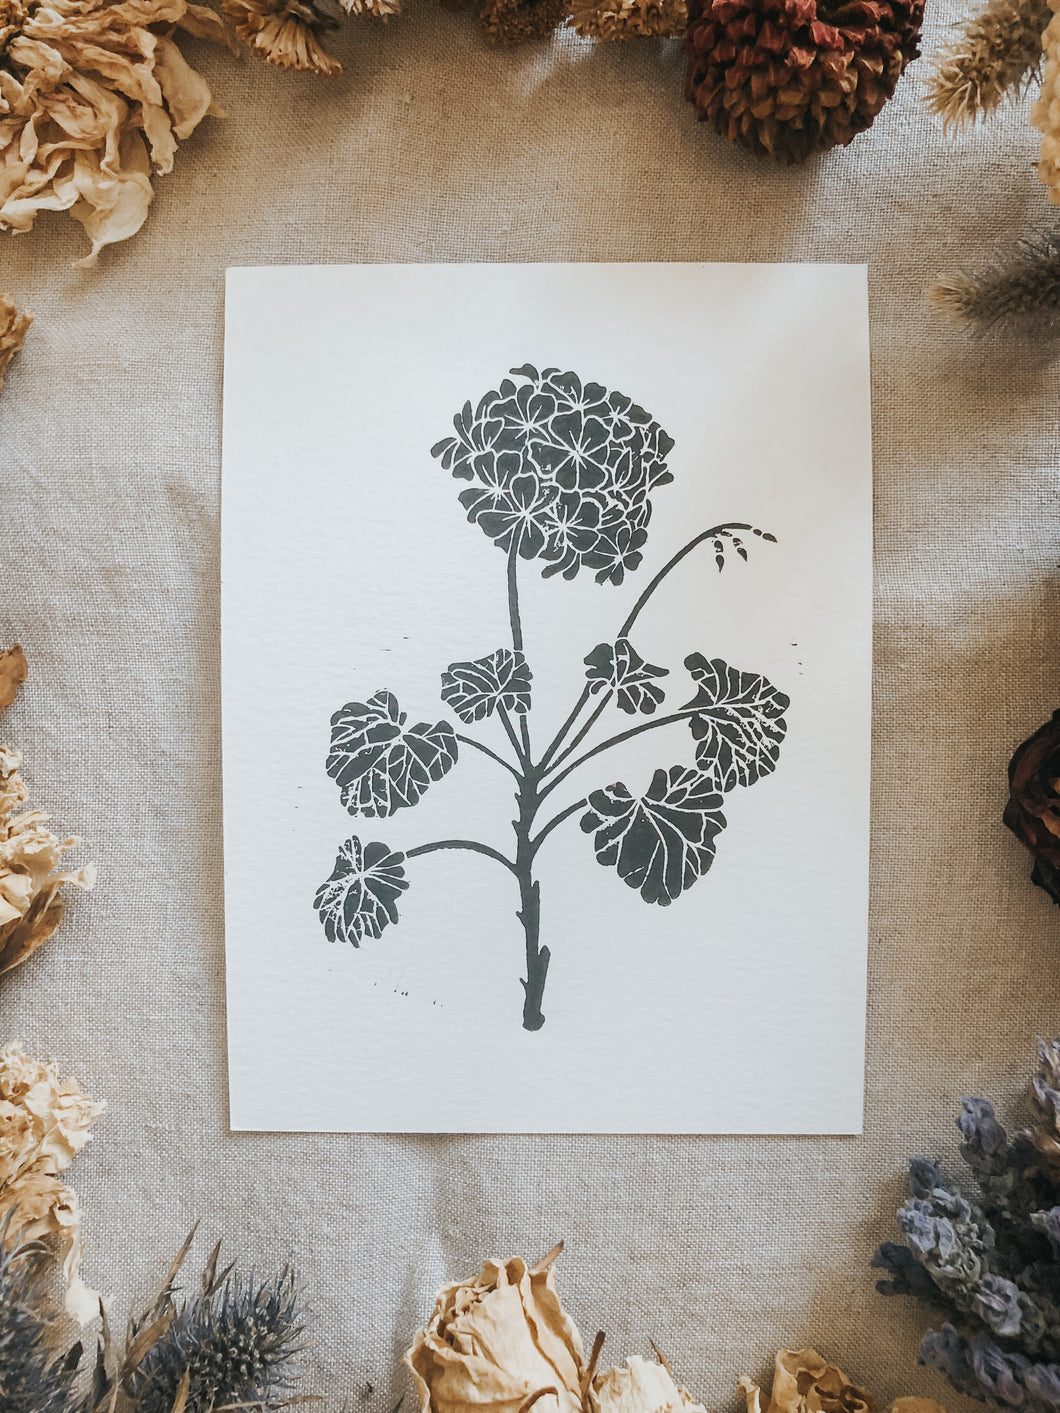 The process starts with a paper drawing that is then transferred to a Lino sheet and carefully hand carved by me, using special tools. Once the carving work is done, a water-based ink is rolled onto the print and then printed onto a sheet of paper. The outcome is rather charming! This elegant geranium flower print can be framed, pegged to a line/meshboard, used in journaling or sent as a gift to a friend.